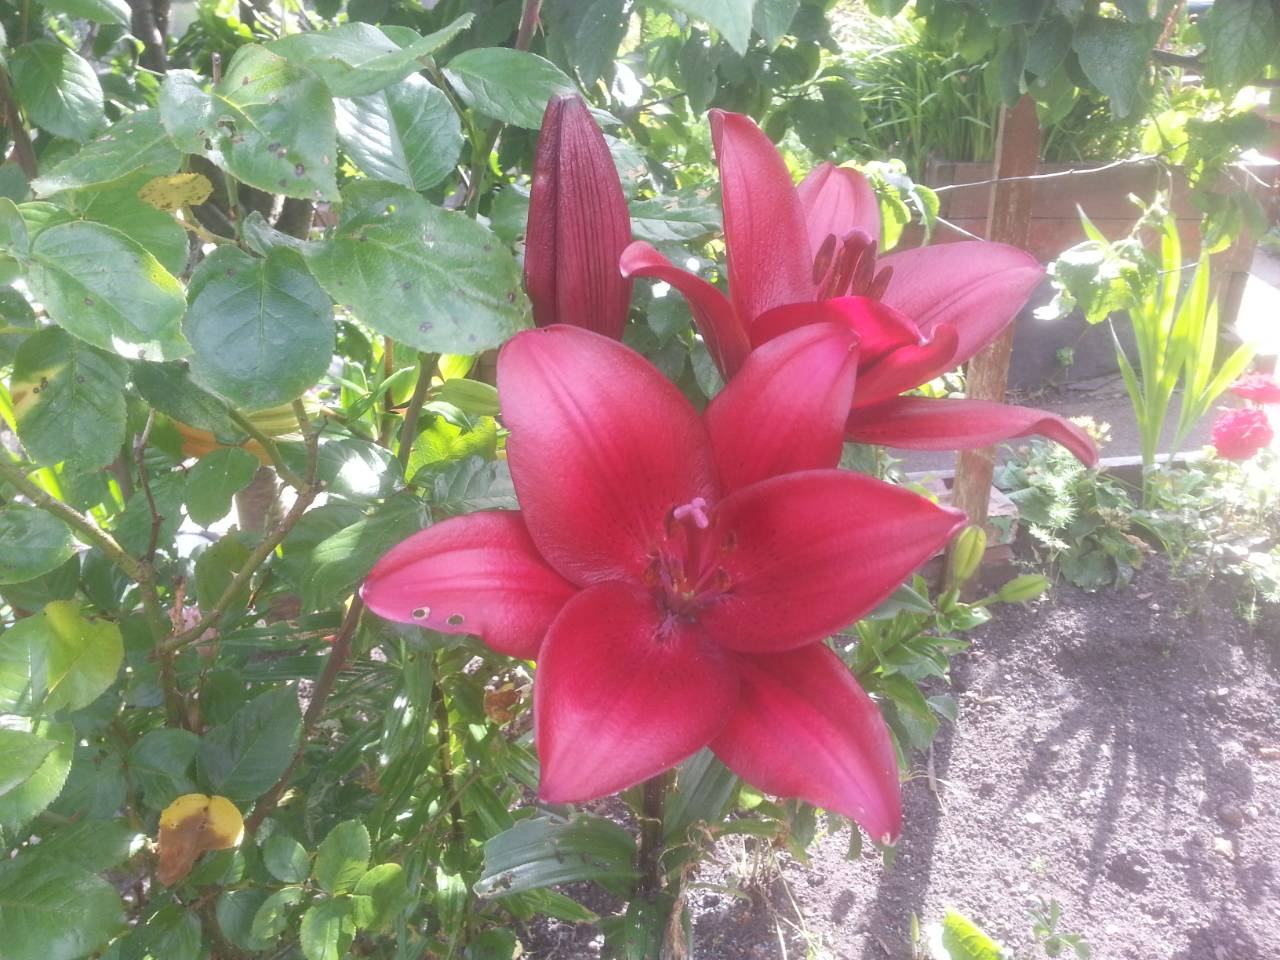 Giant Pink Lily